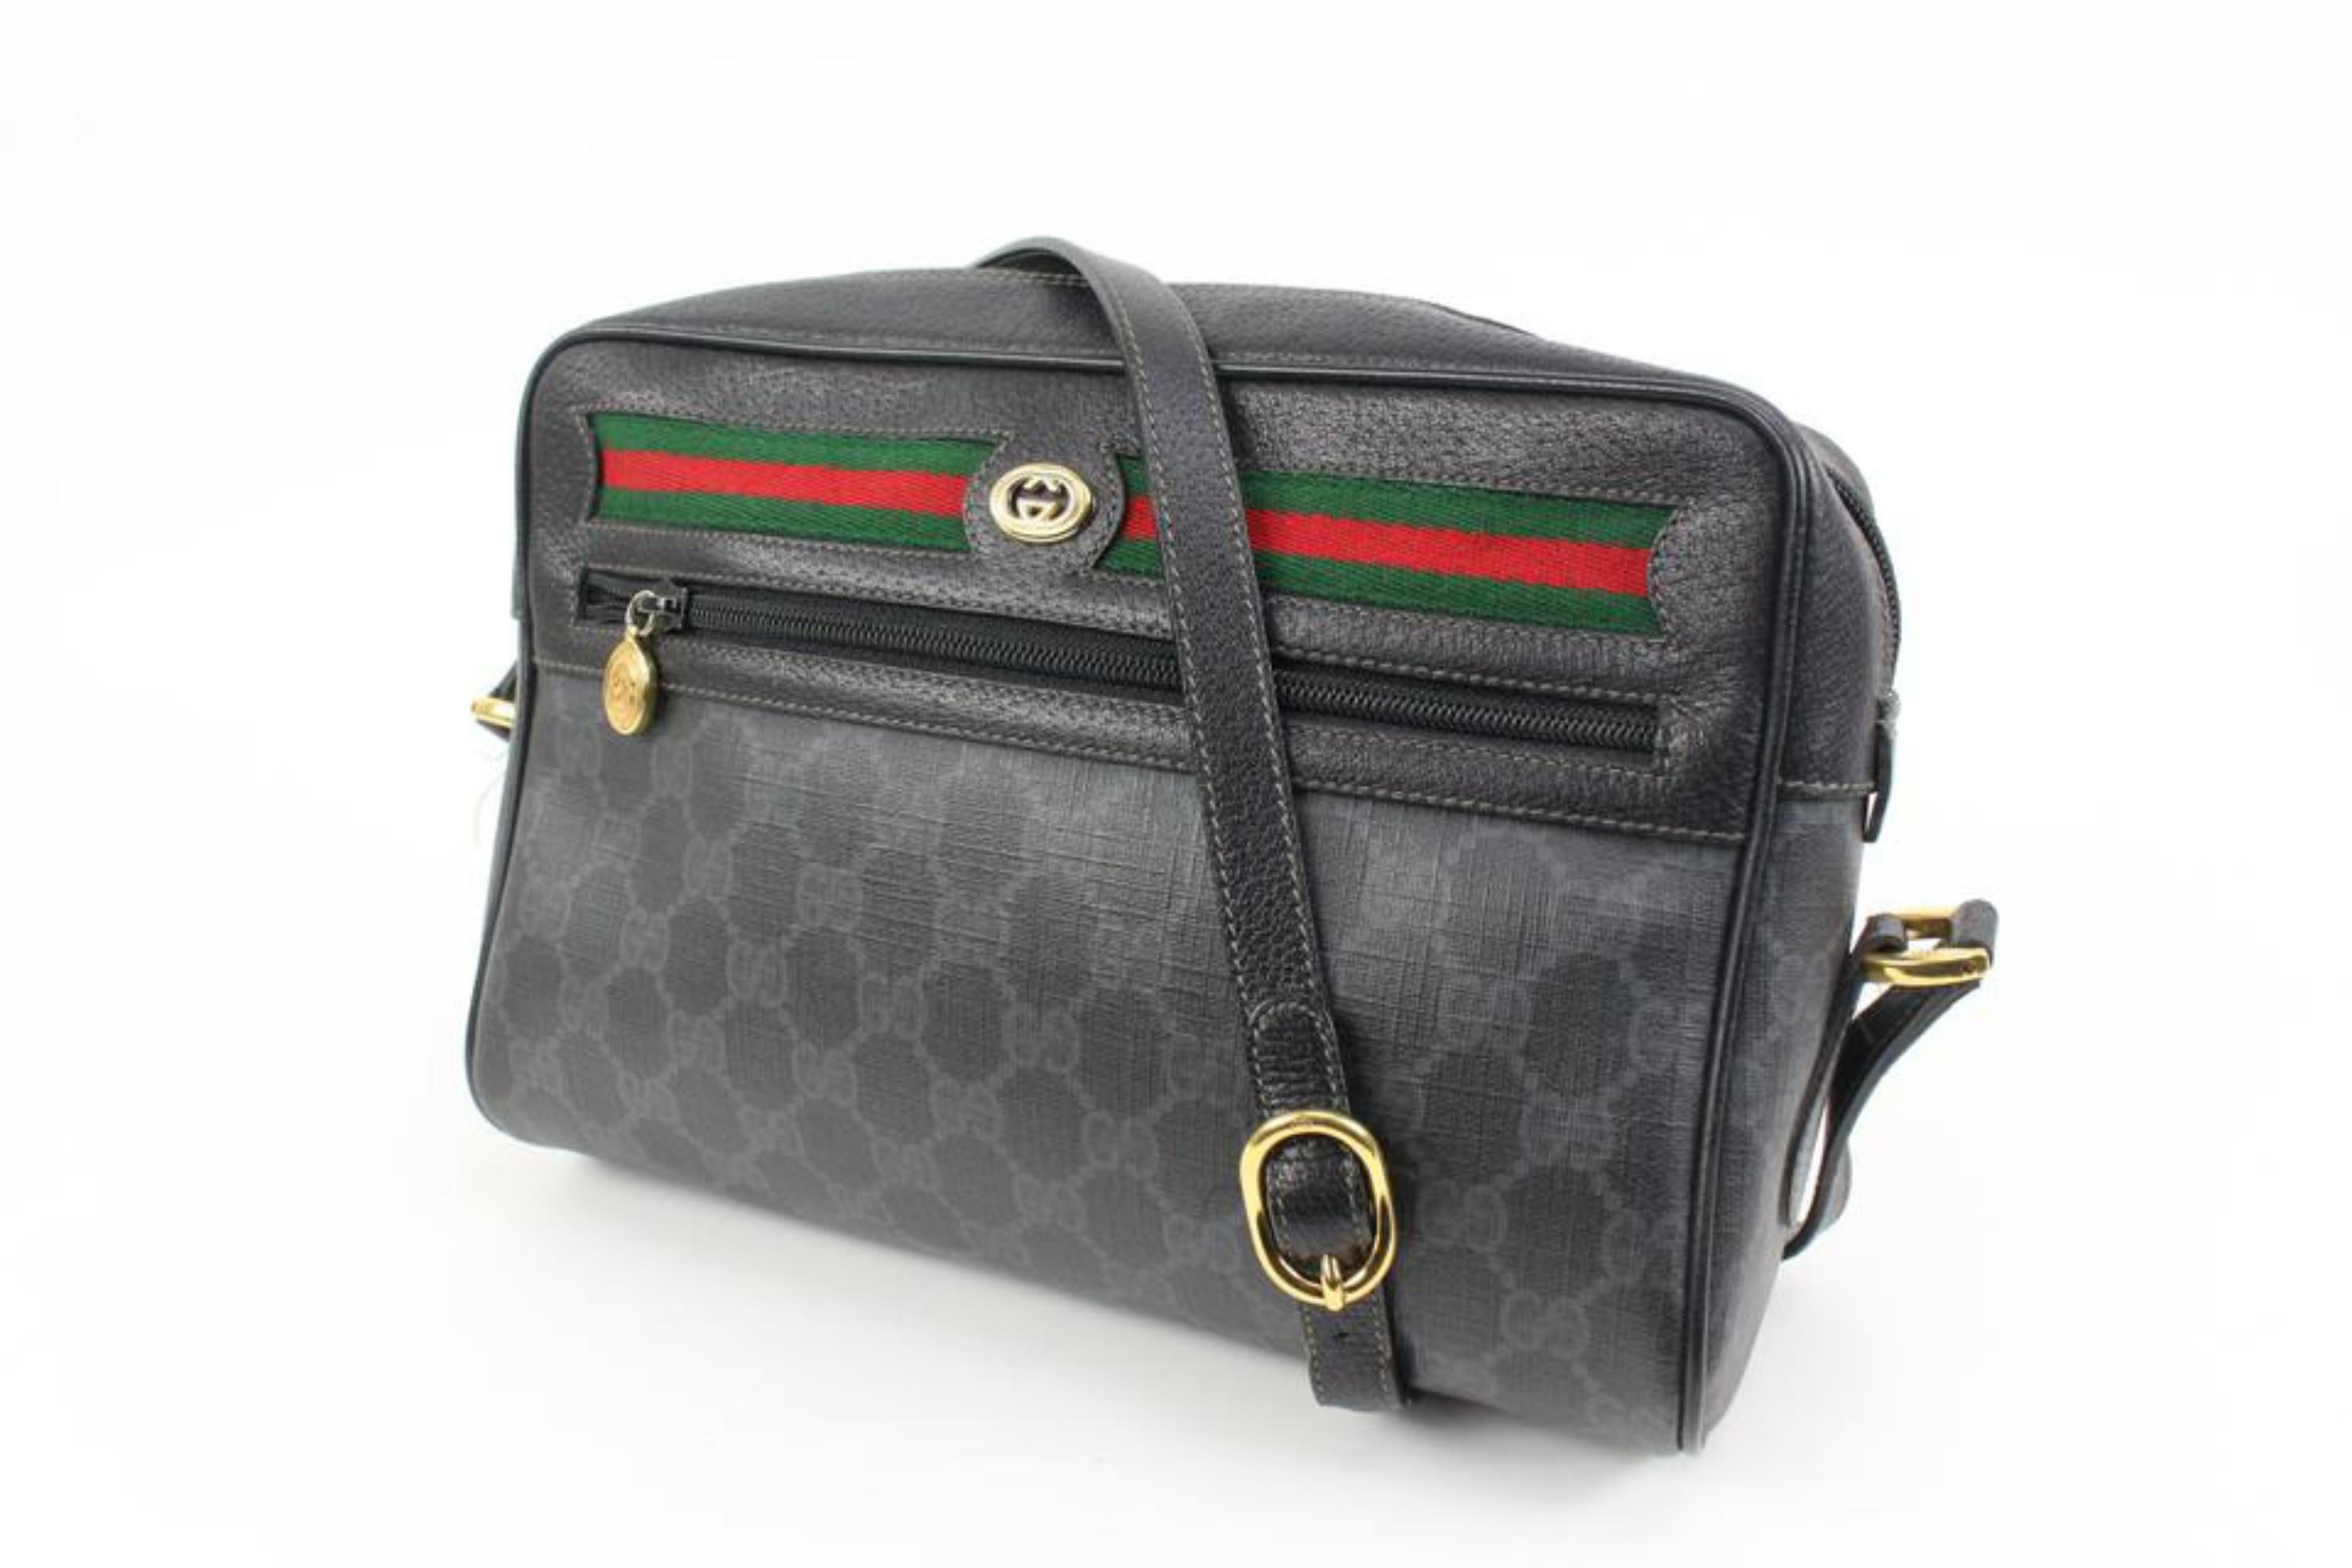 Gucci Black Supreme GG Web Ophidia Camera Bag 84g323s
Date Code/Serial Number: 119-02-088
Made In: Italy
Measurements: Length:  10